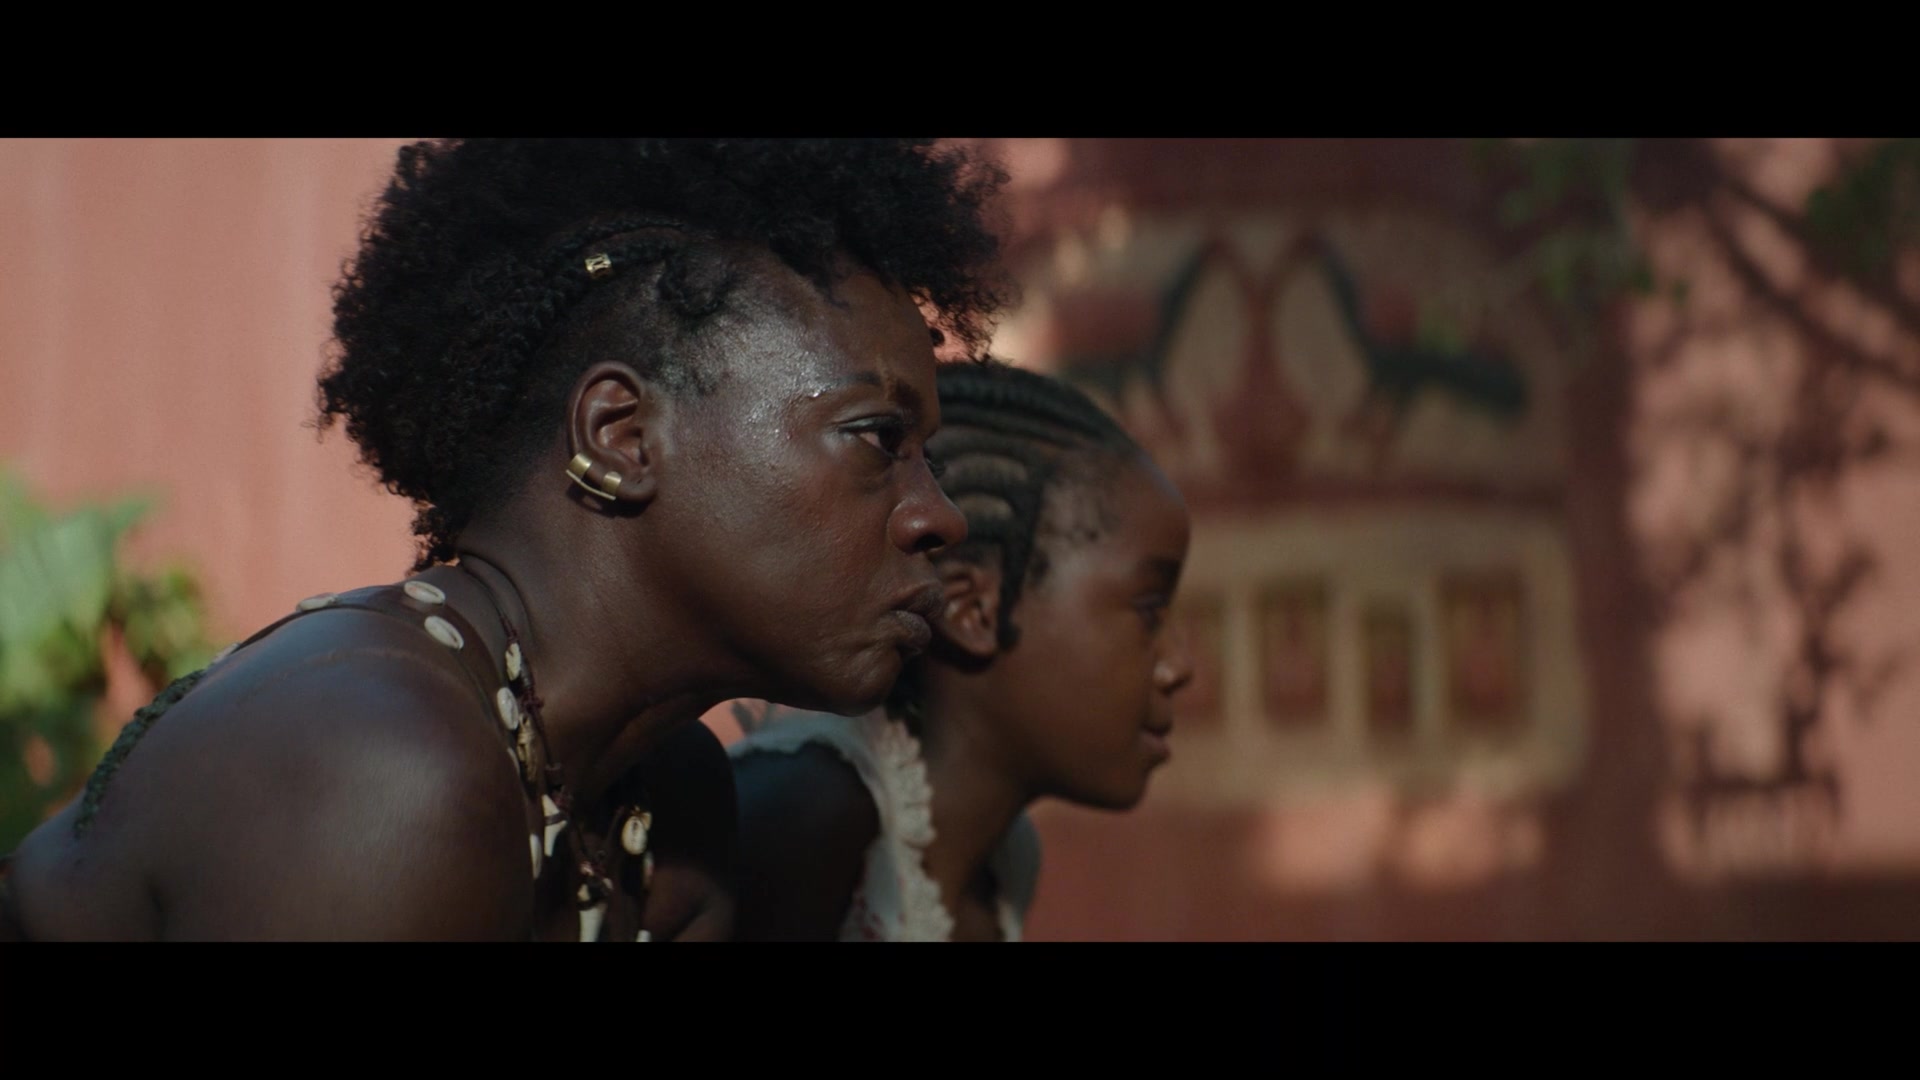 General Nanisca (Viola Davis) has a private moment with Nawi (Thuso Mbedu) in The Woman King (2022), Sony Pictures